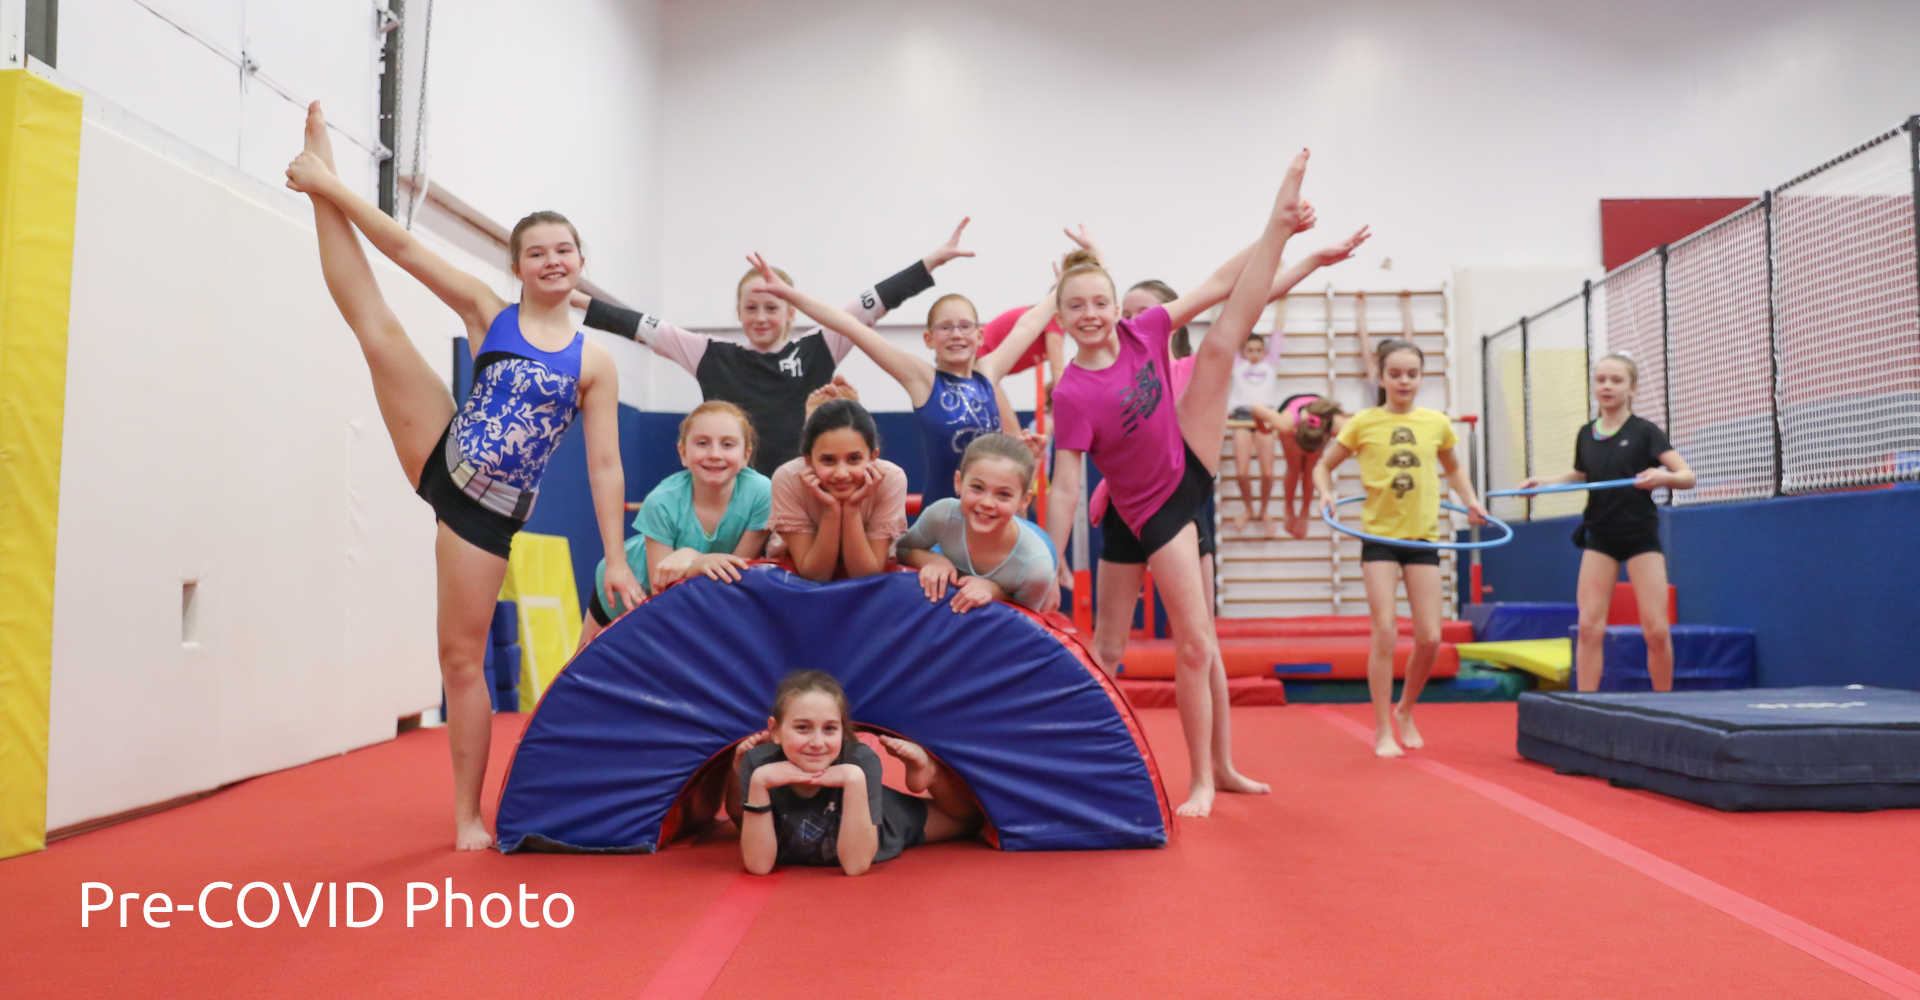 A group of young gymnasts striking group pose at Gymworld Adventures in Gymnastics in Northwest London, Ontario